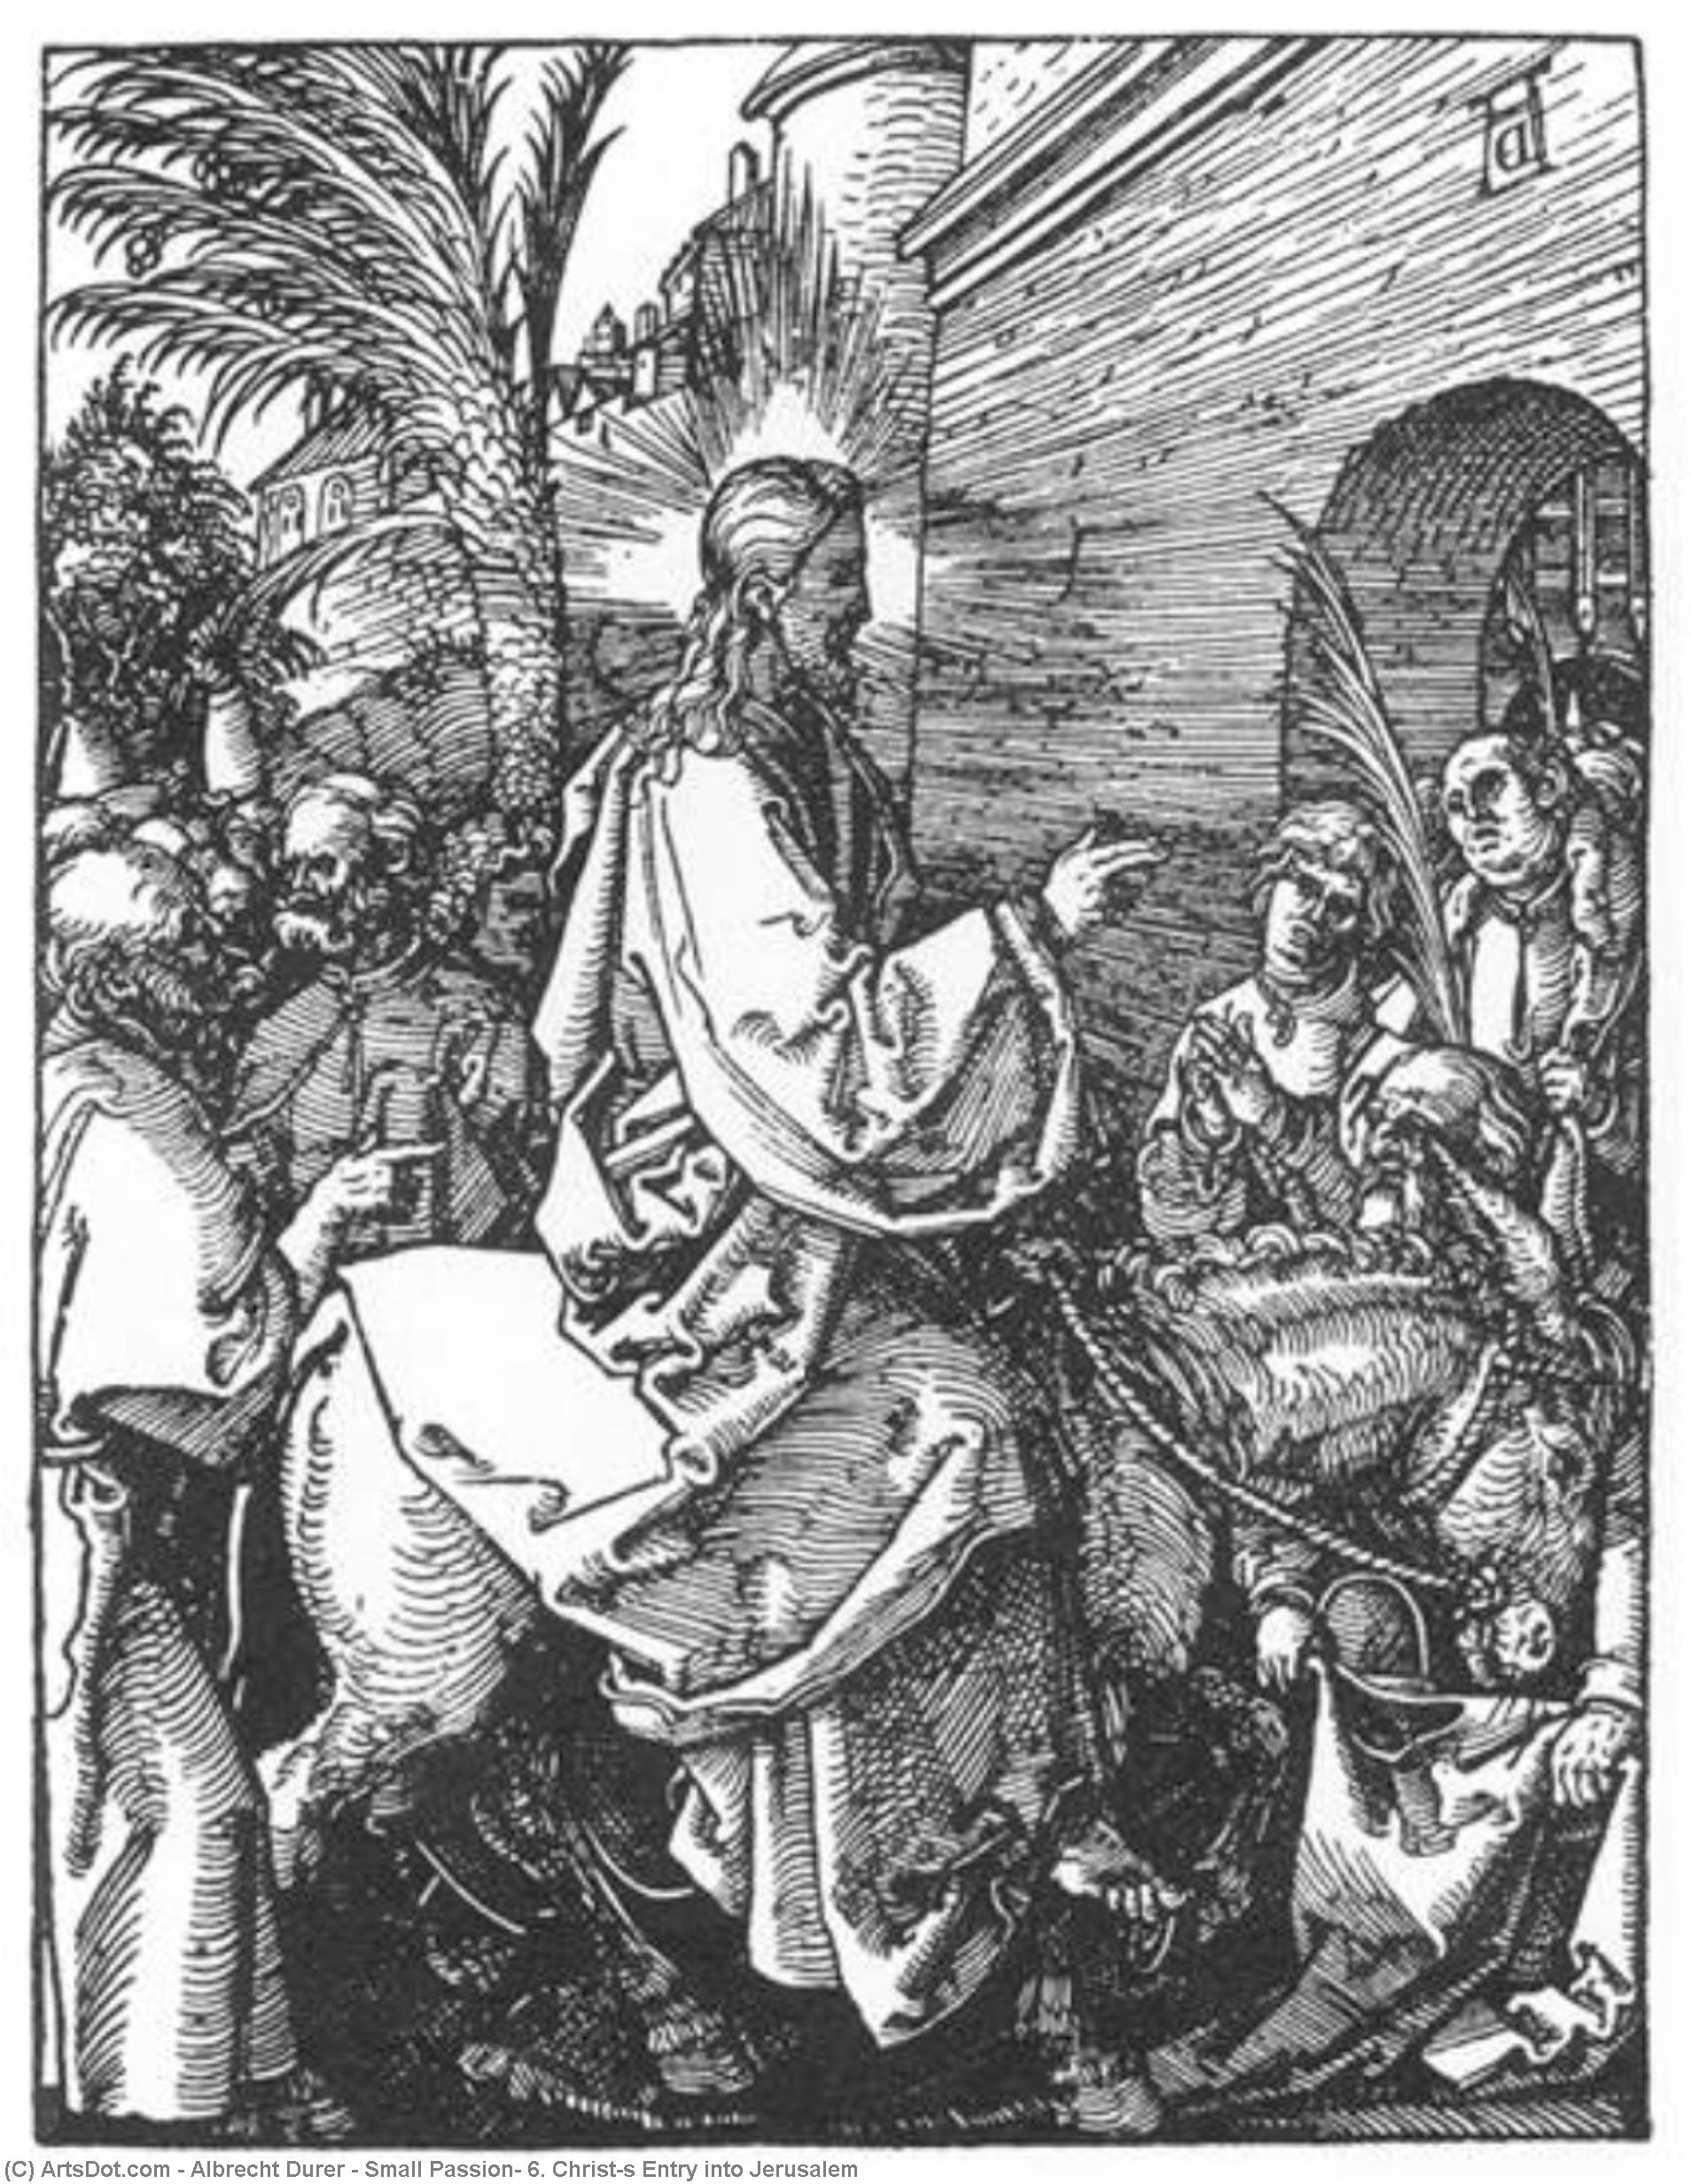 WikiOO.org - Encyclopedia of Fine Arts - Maalaus, taideteos Albrecht Durer - Small Passion: 6. Christ's Entry into Jerusalem